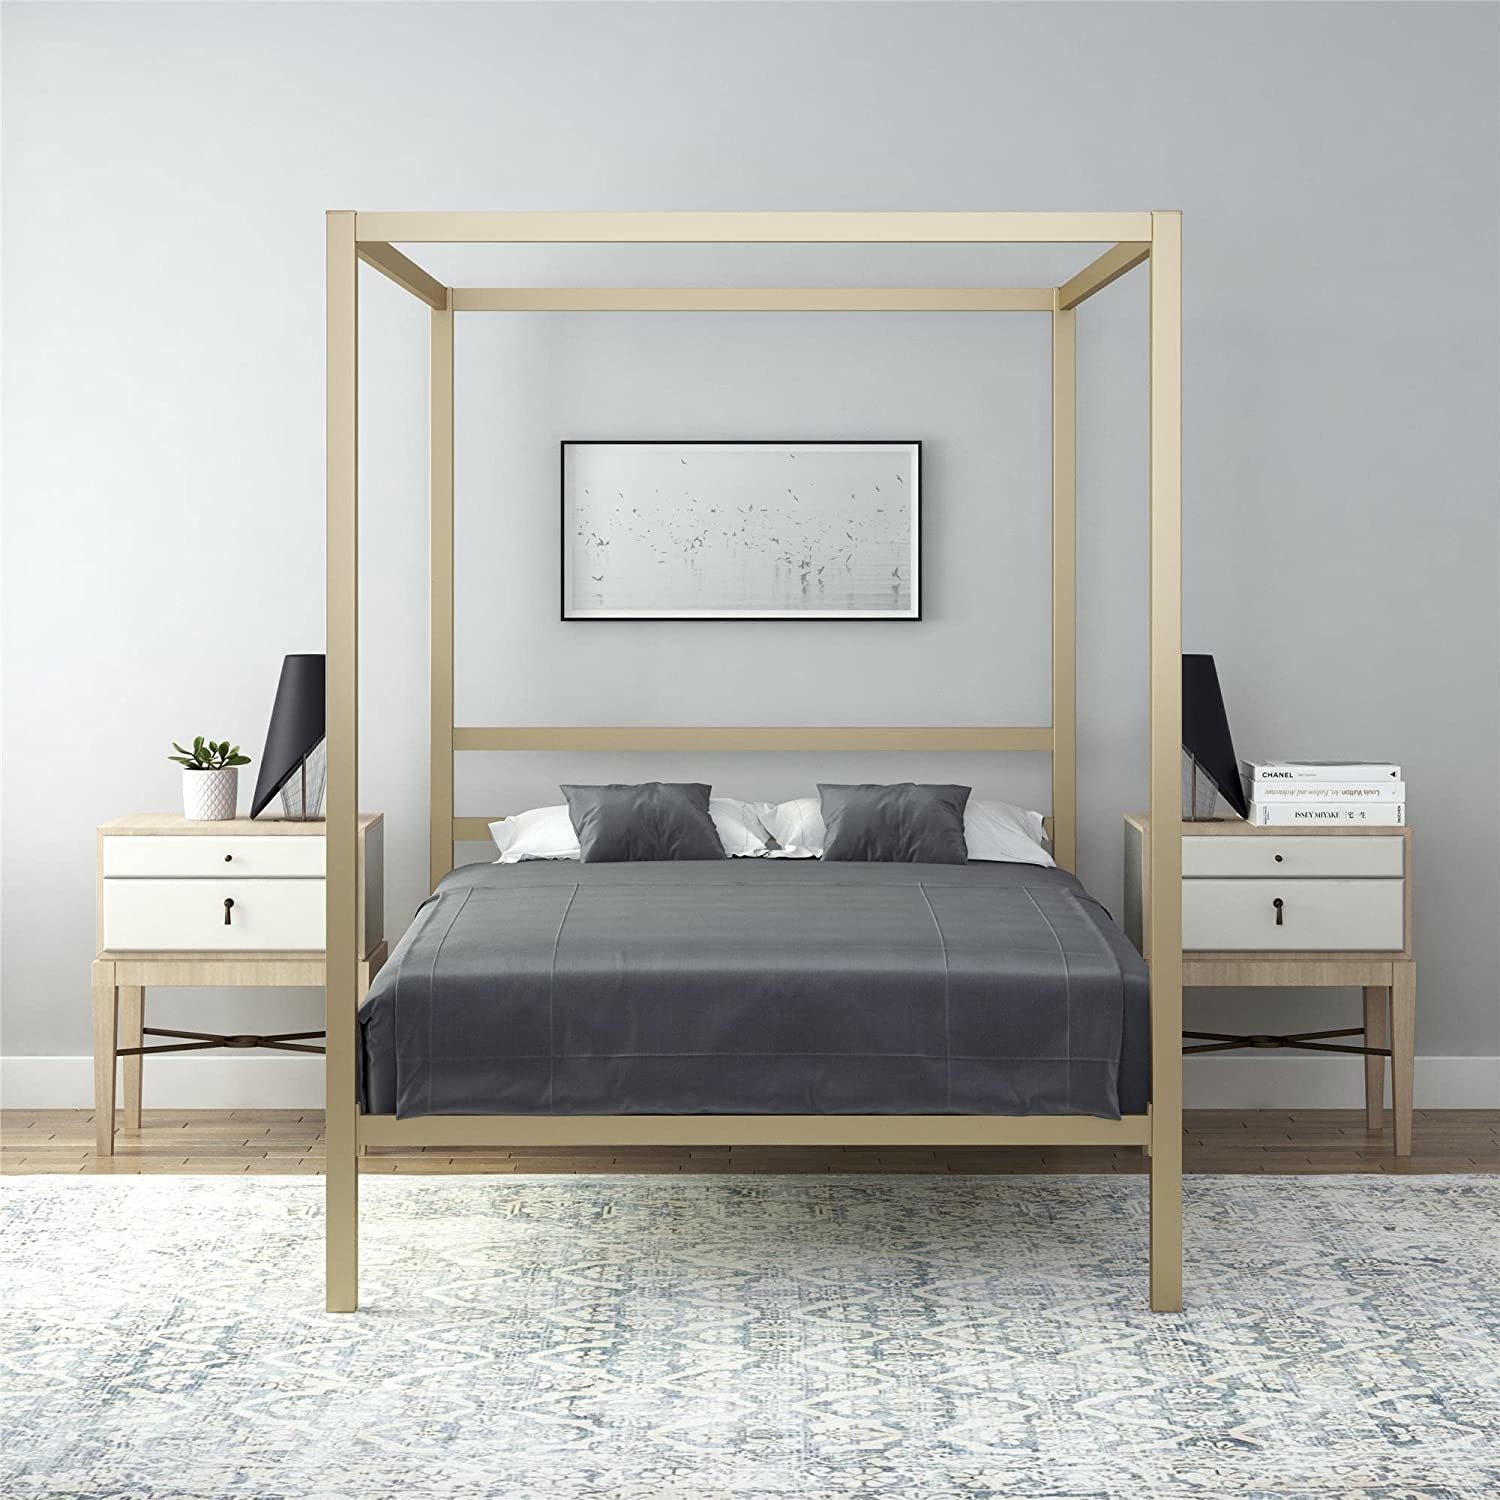 Dhp Modern Metal Canopy Platform Bed With Minimalist Headboard And Four, Gold. - $298.93